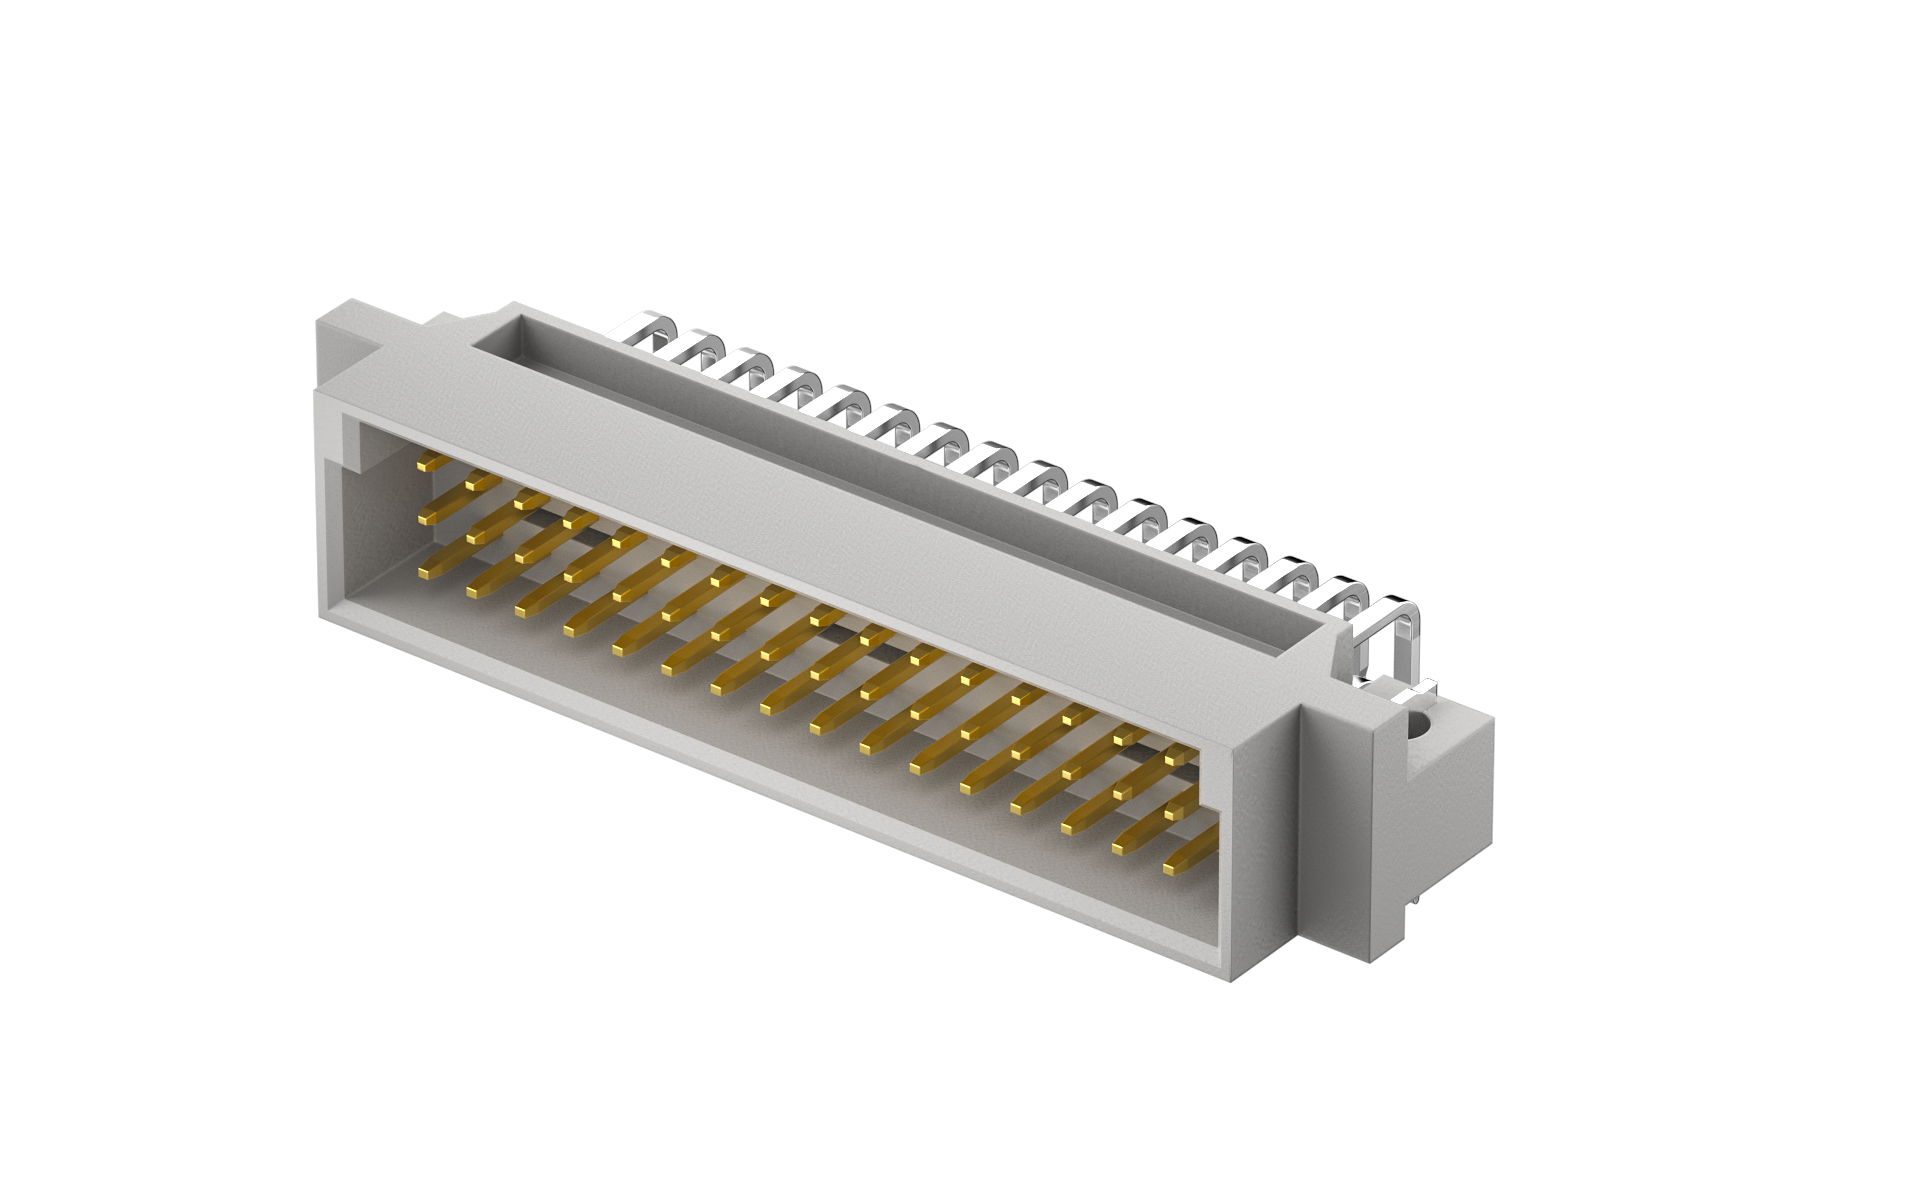 TXGA is a leading domestic connector manufacturer with mature and professional production processes. You only need to provide the final